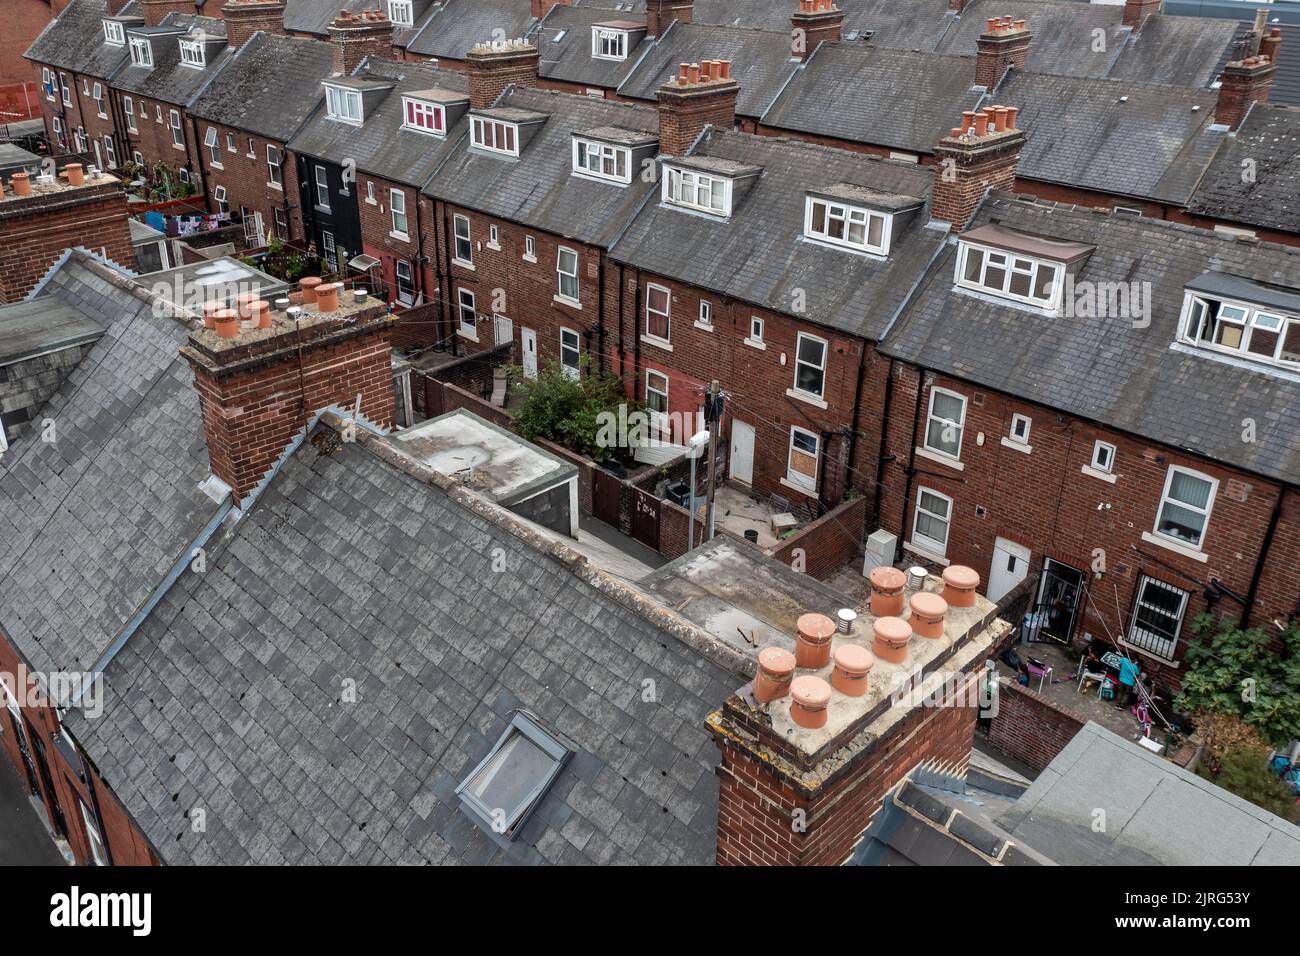 LEEDS, UK - AUGUST 24, 2022.  Aerial view of the rooftops and houses of a run down Northern town in England during the UK Government's levelling up Stock Photo